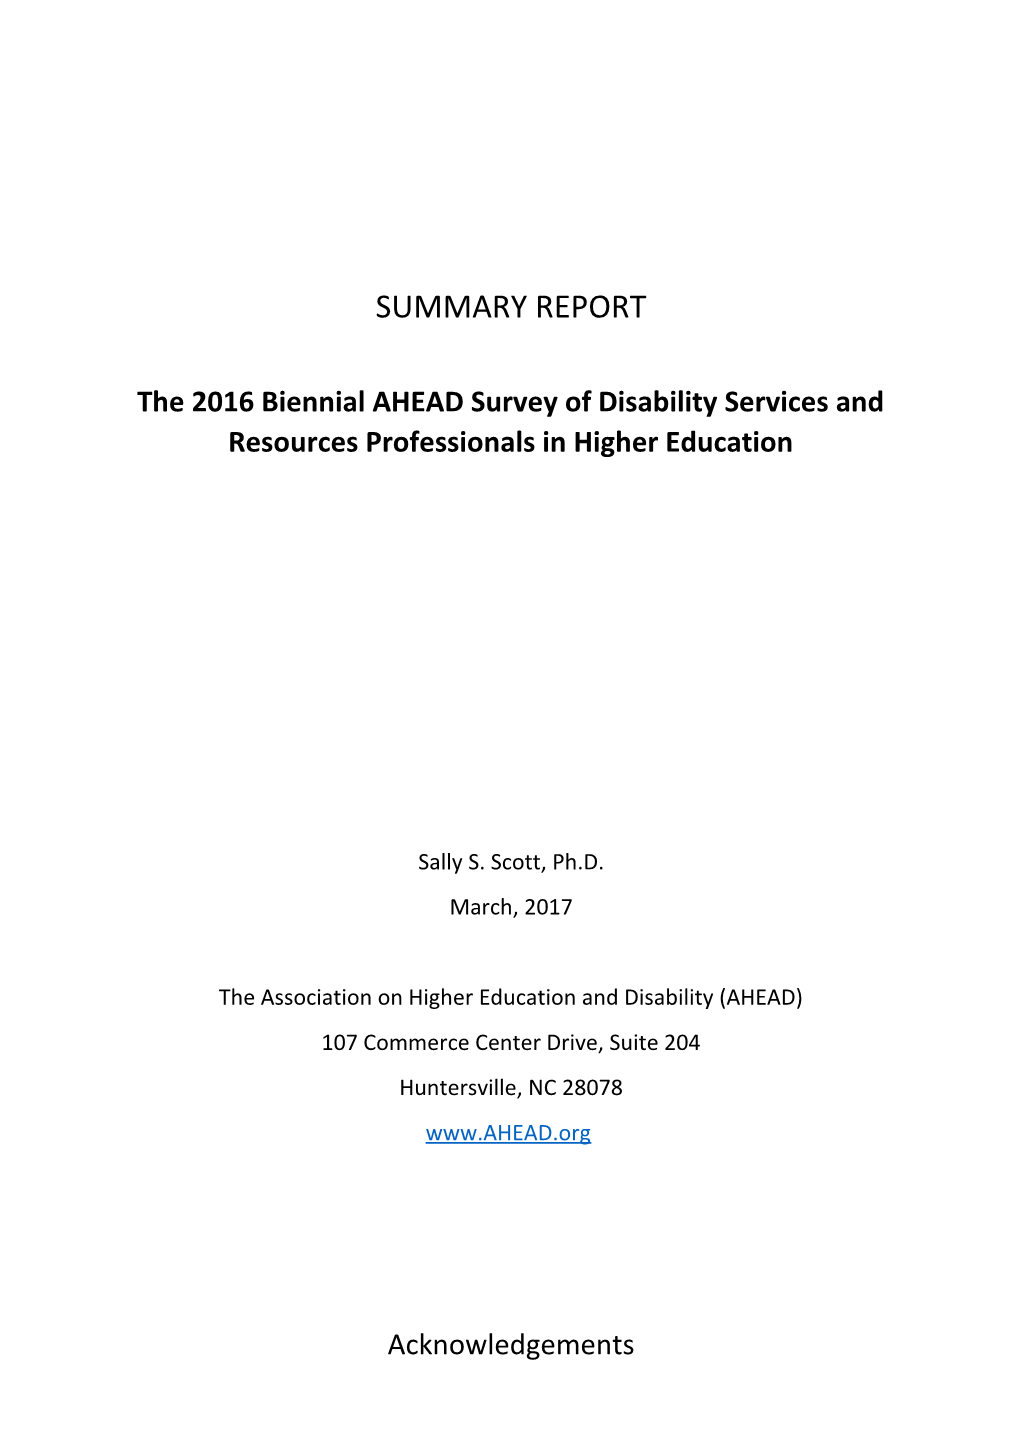 The 2016 Biennial AHEAD Survey of Disability Services and Resources Professionals in Higher